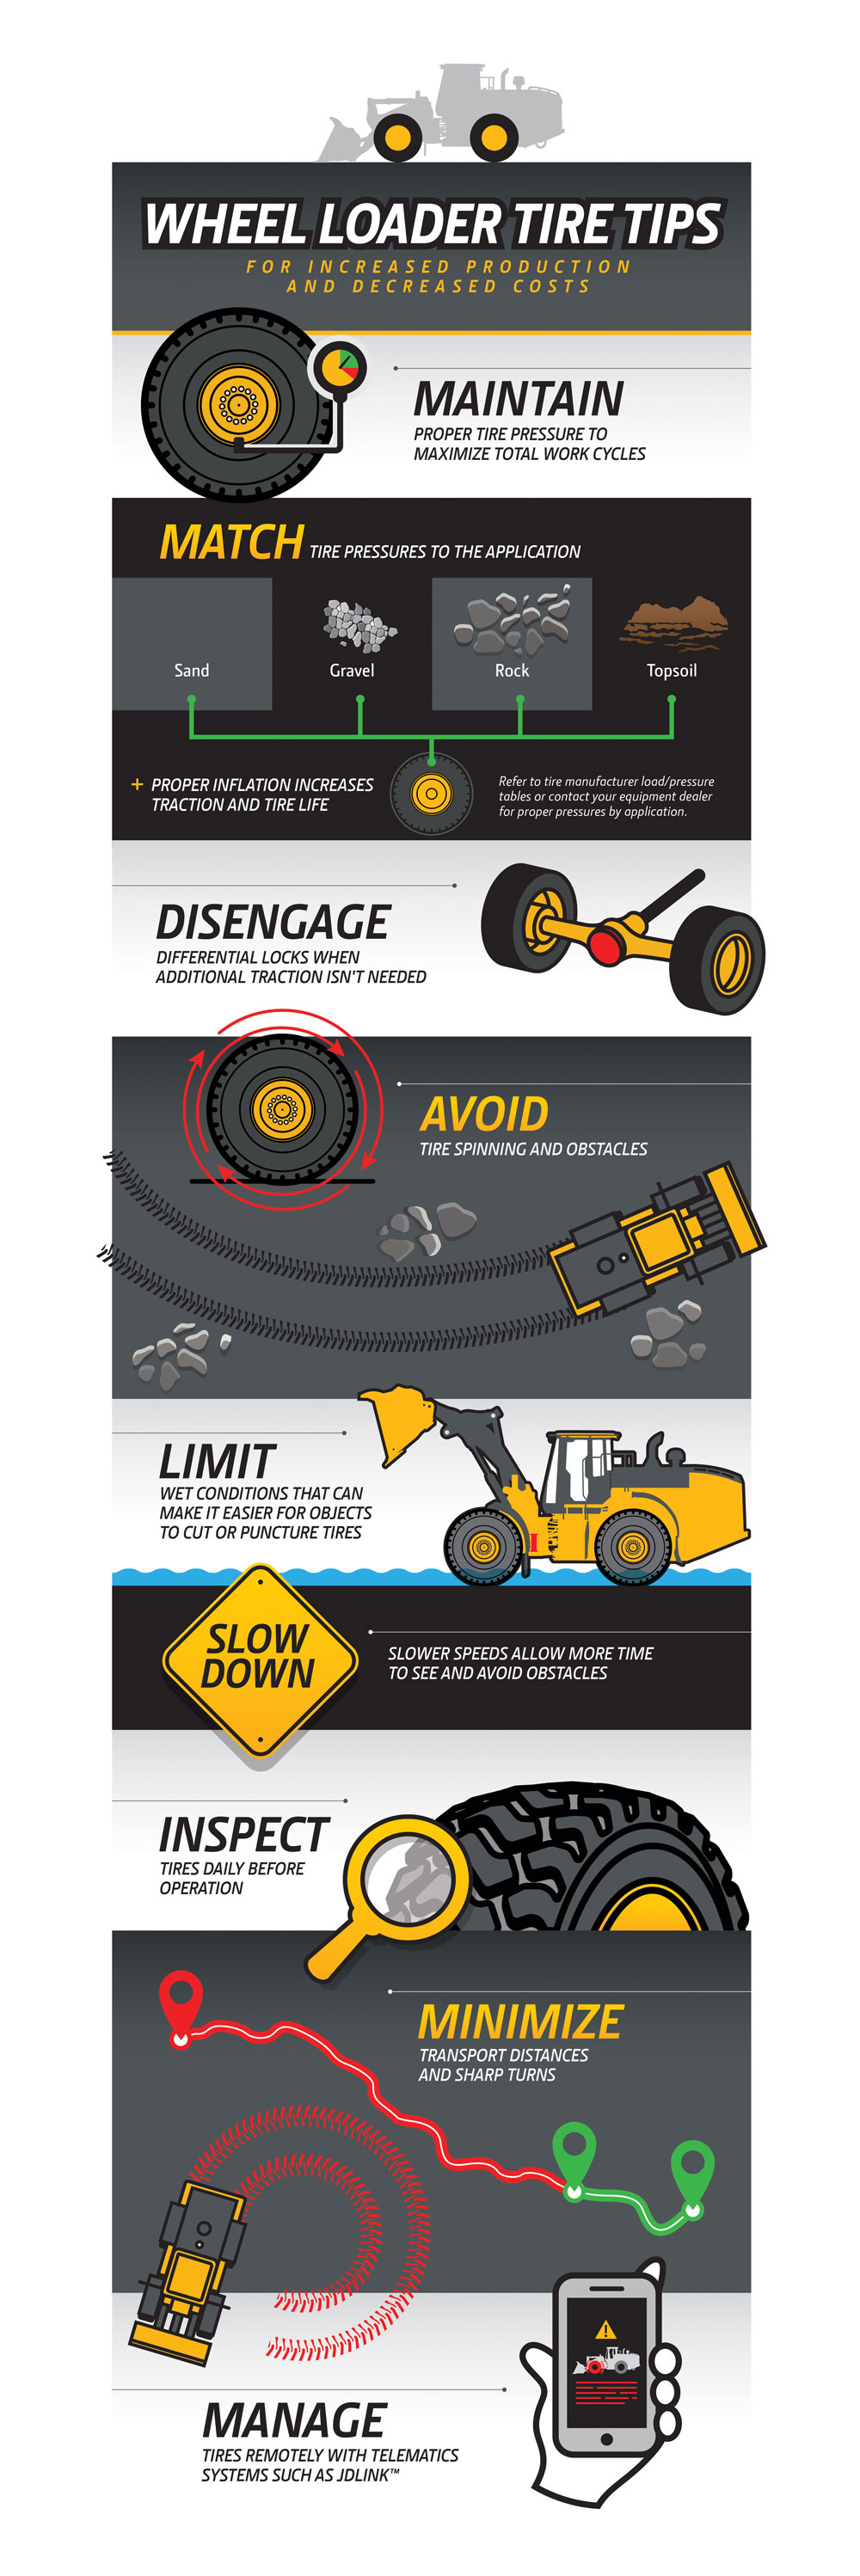 Wheel Loader Tire Tips Infographic